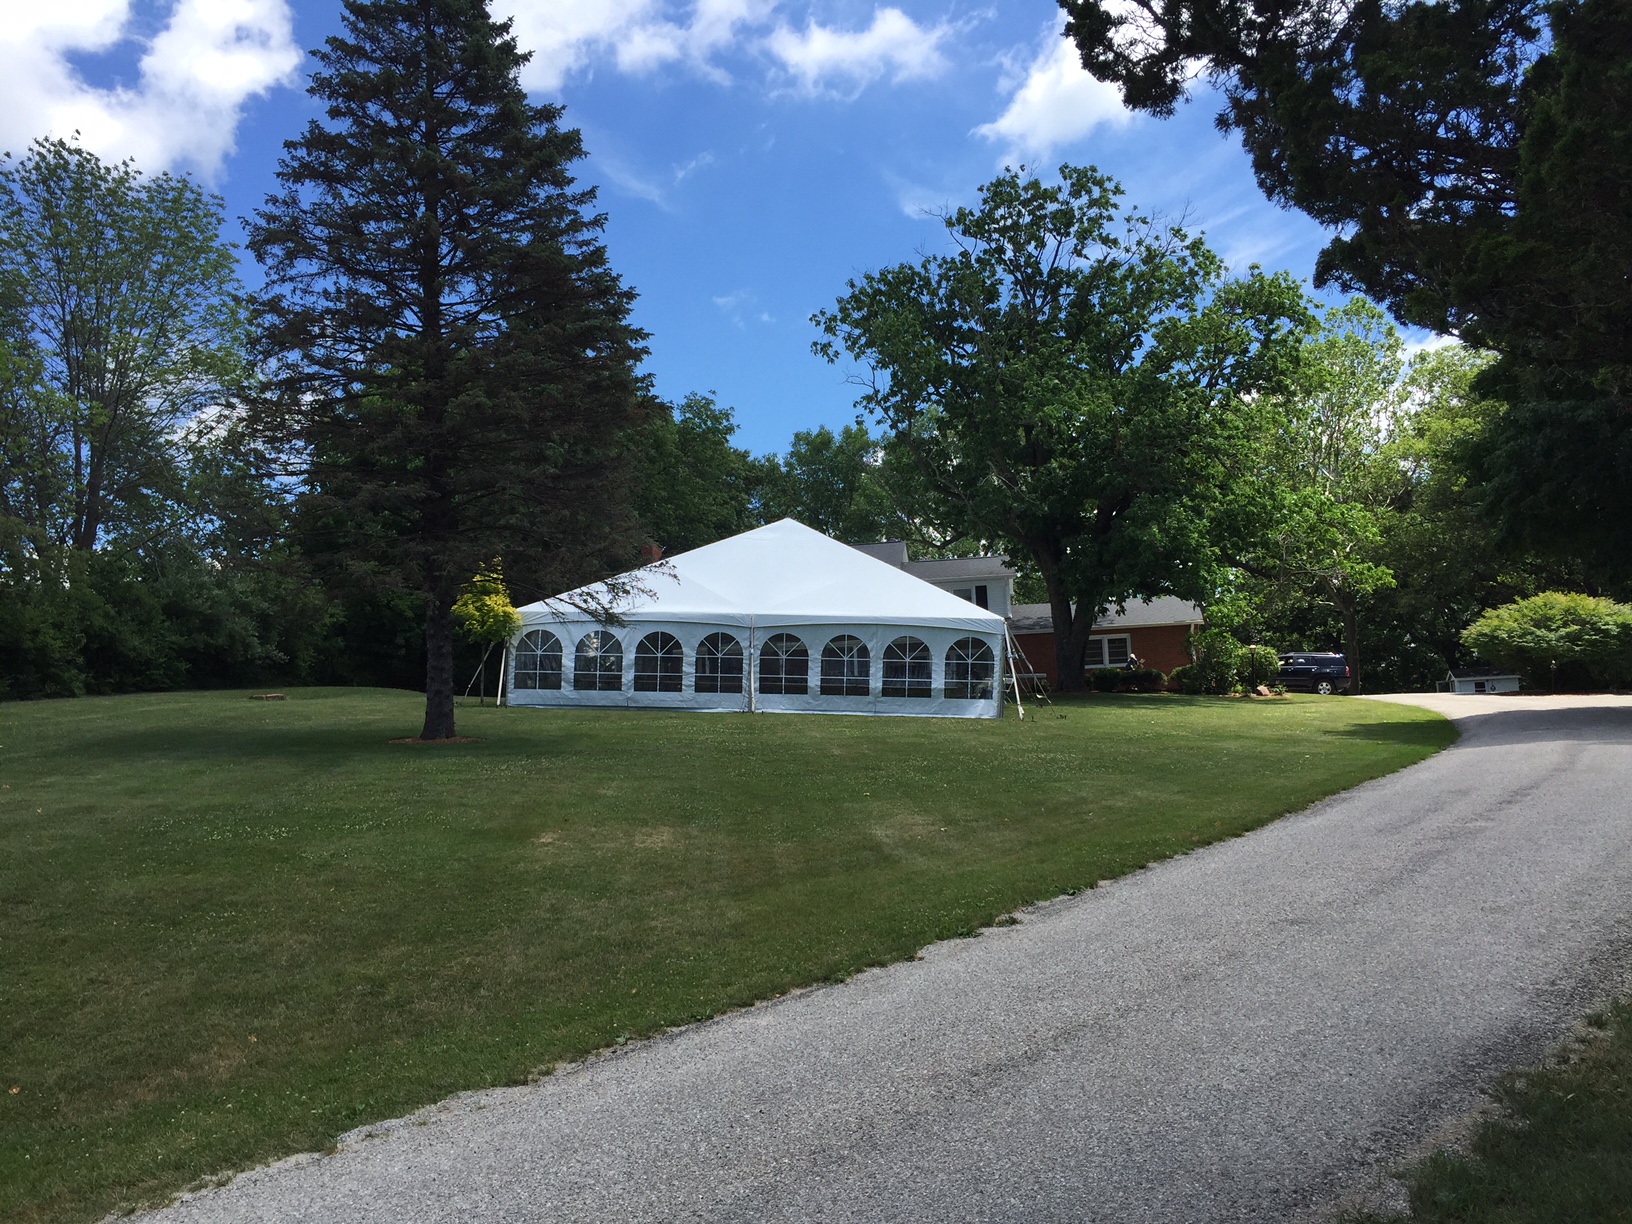 Front of 40' x 60' hybrid tent with French Window side wall on two sides used for an outdoor wedding reception